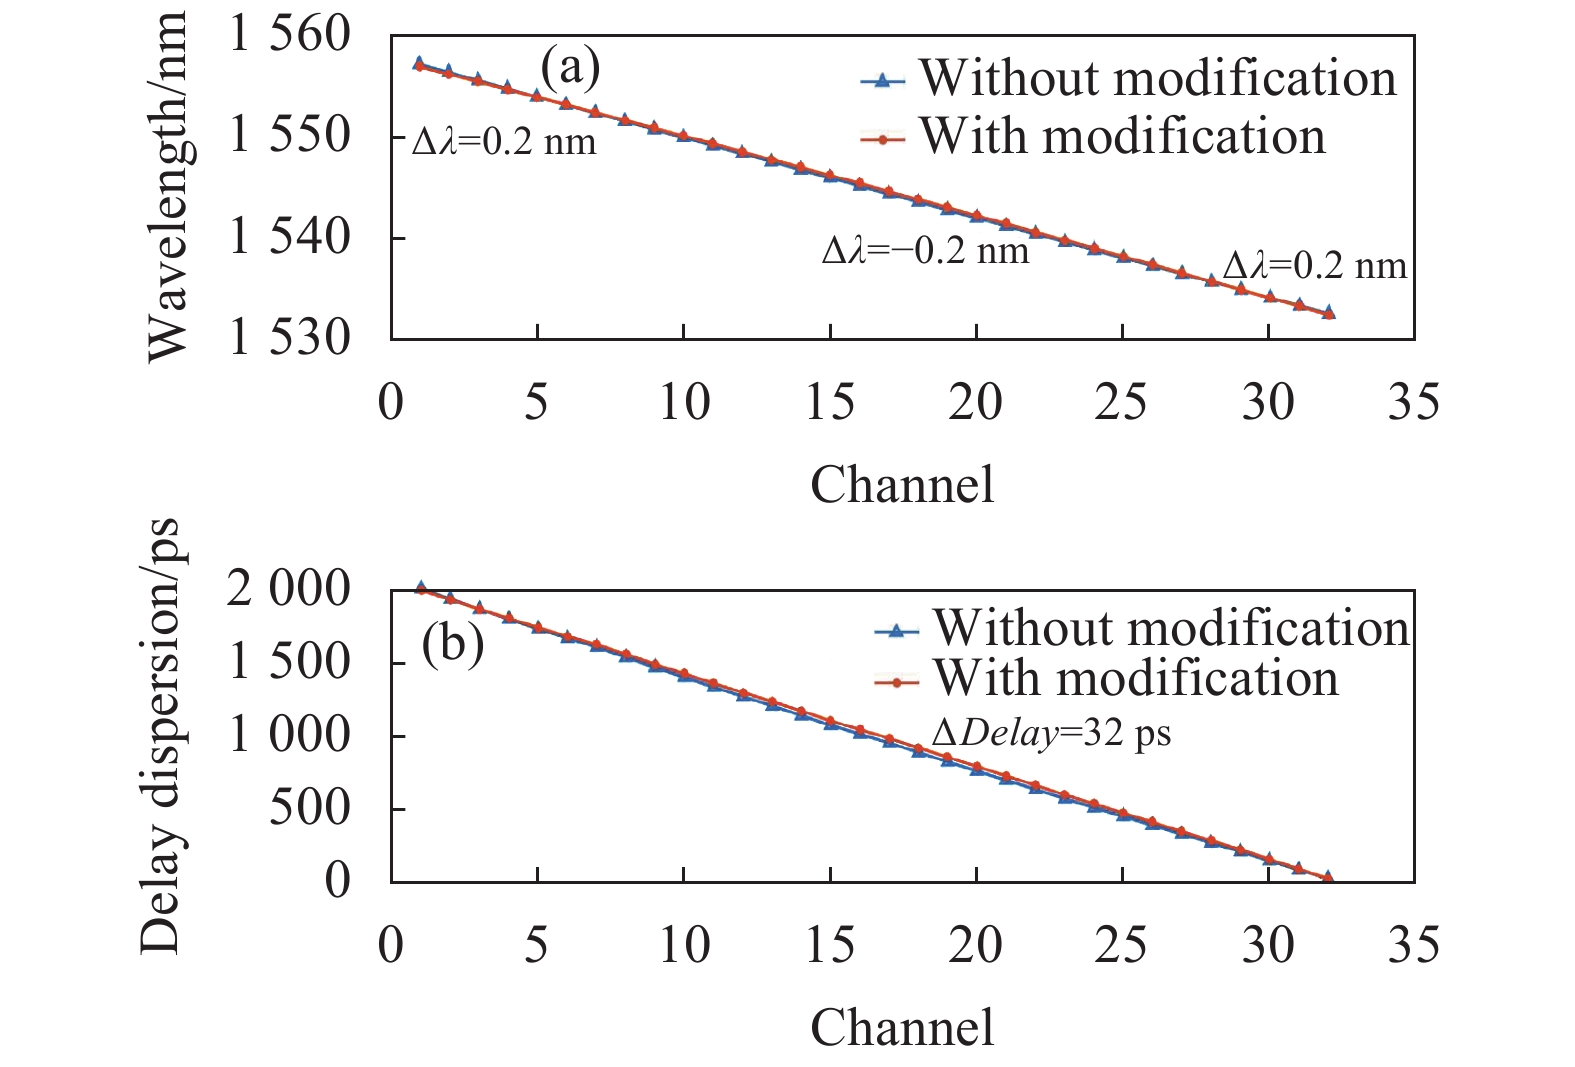 (a) Wavelengths versus channels without modification and with modification; (b) Relative dispersion delays of different channels to the 32nd channel without modification and with modification